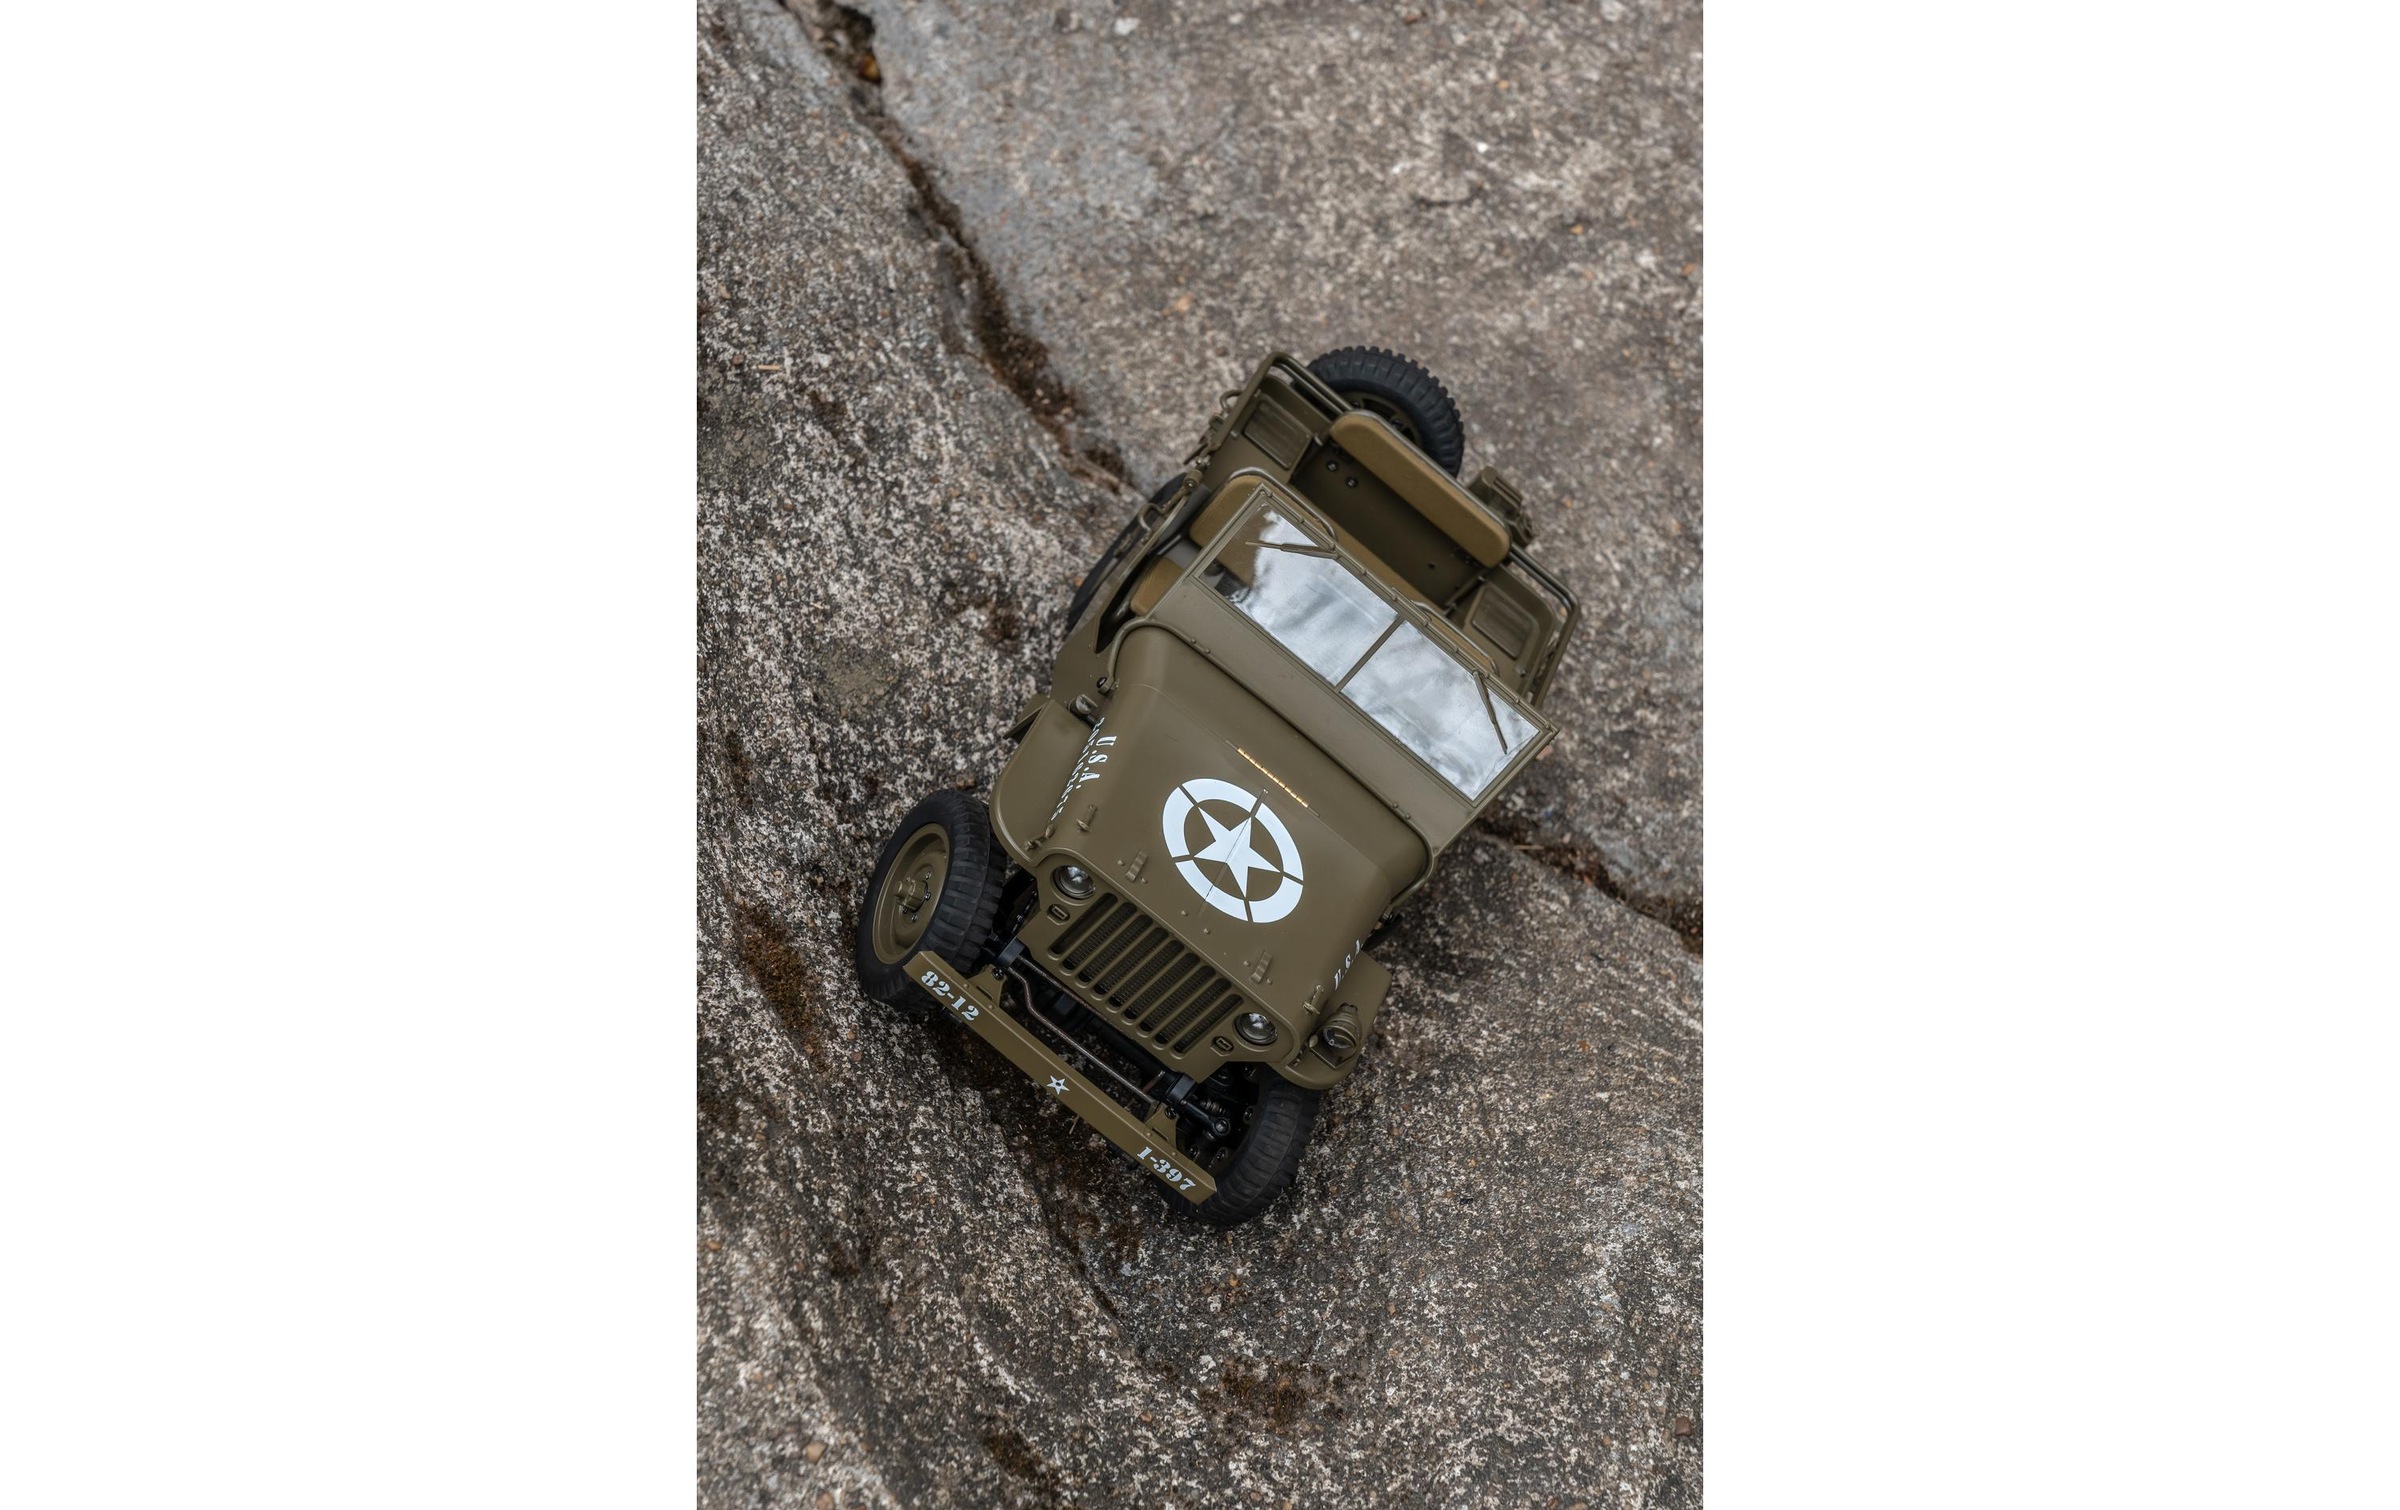 RC-Auto »RocHobby 1941 MB Willys Jeep, 1:12«